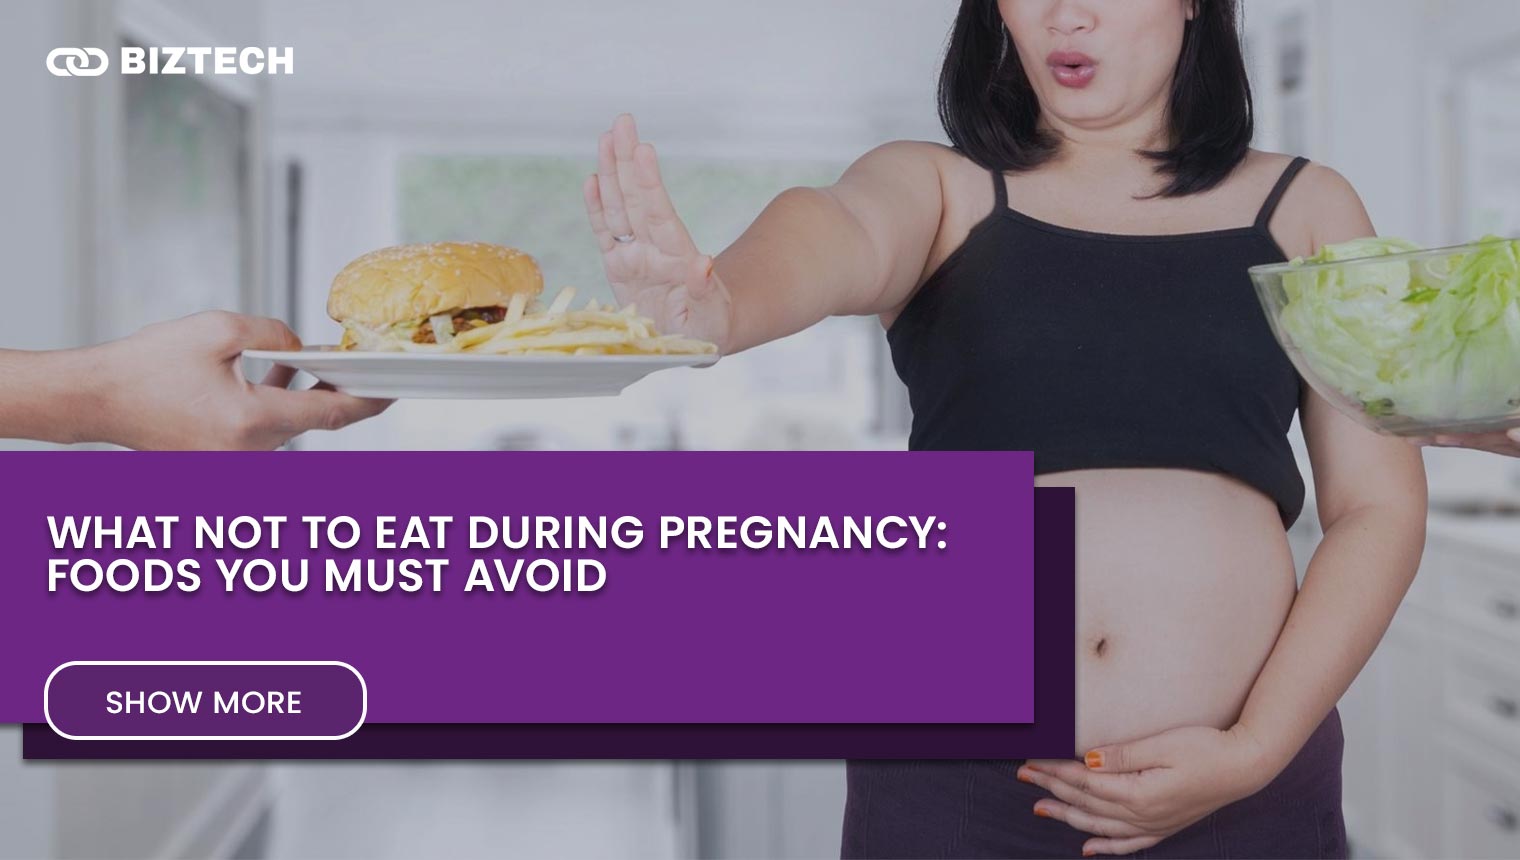 What Not To Eat During Pregnancy: Foods You Must Avoid